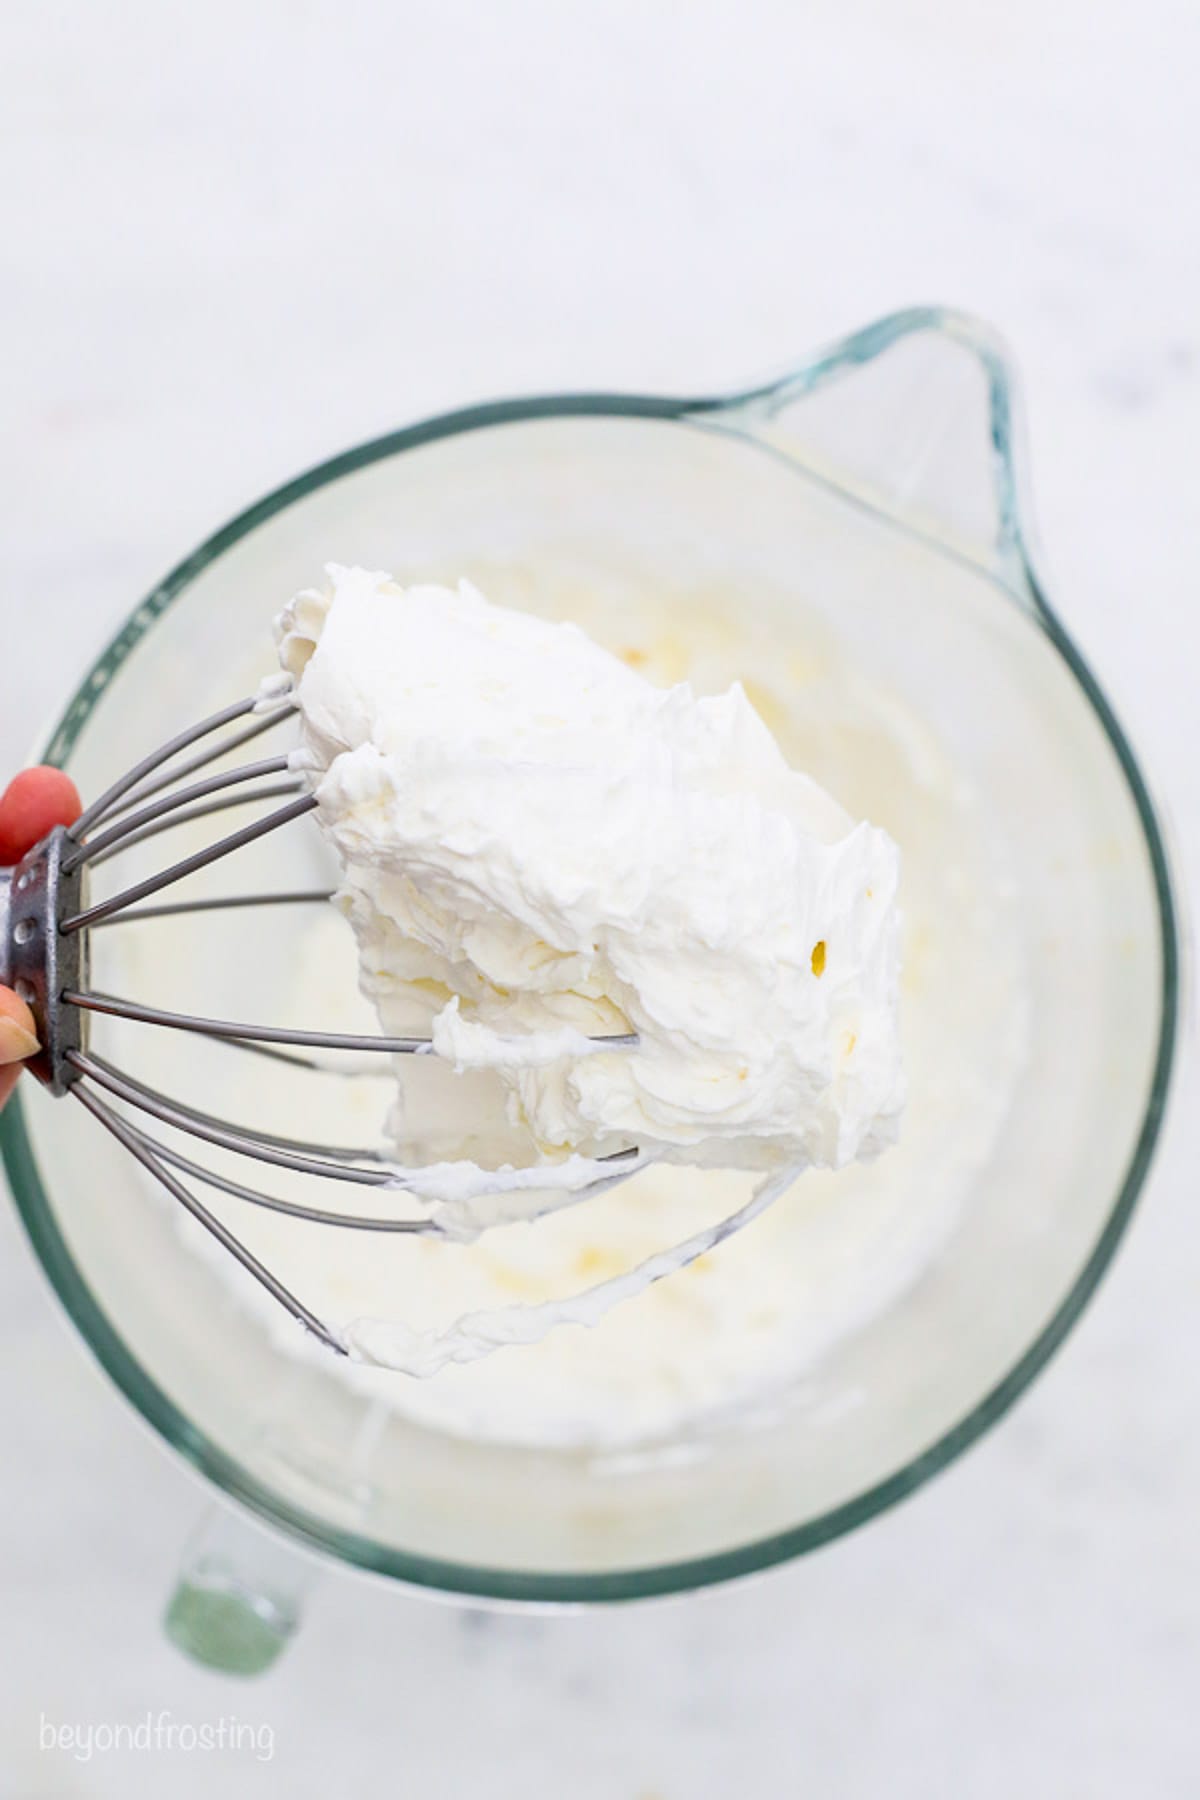 A hand holding a stand mixer attachment covered with mascarpone whipped cream frosting over a mixing bowl.